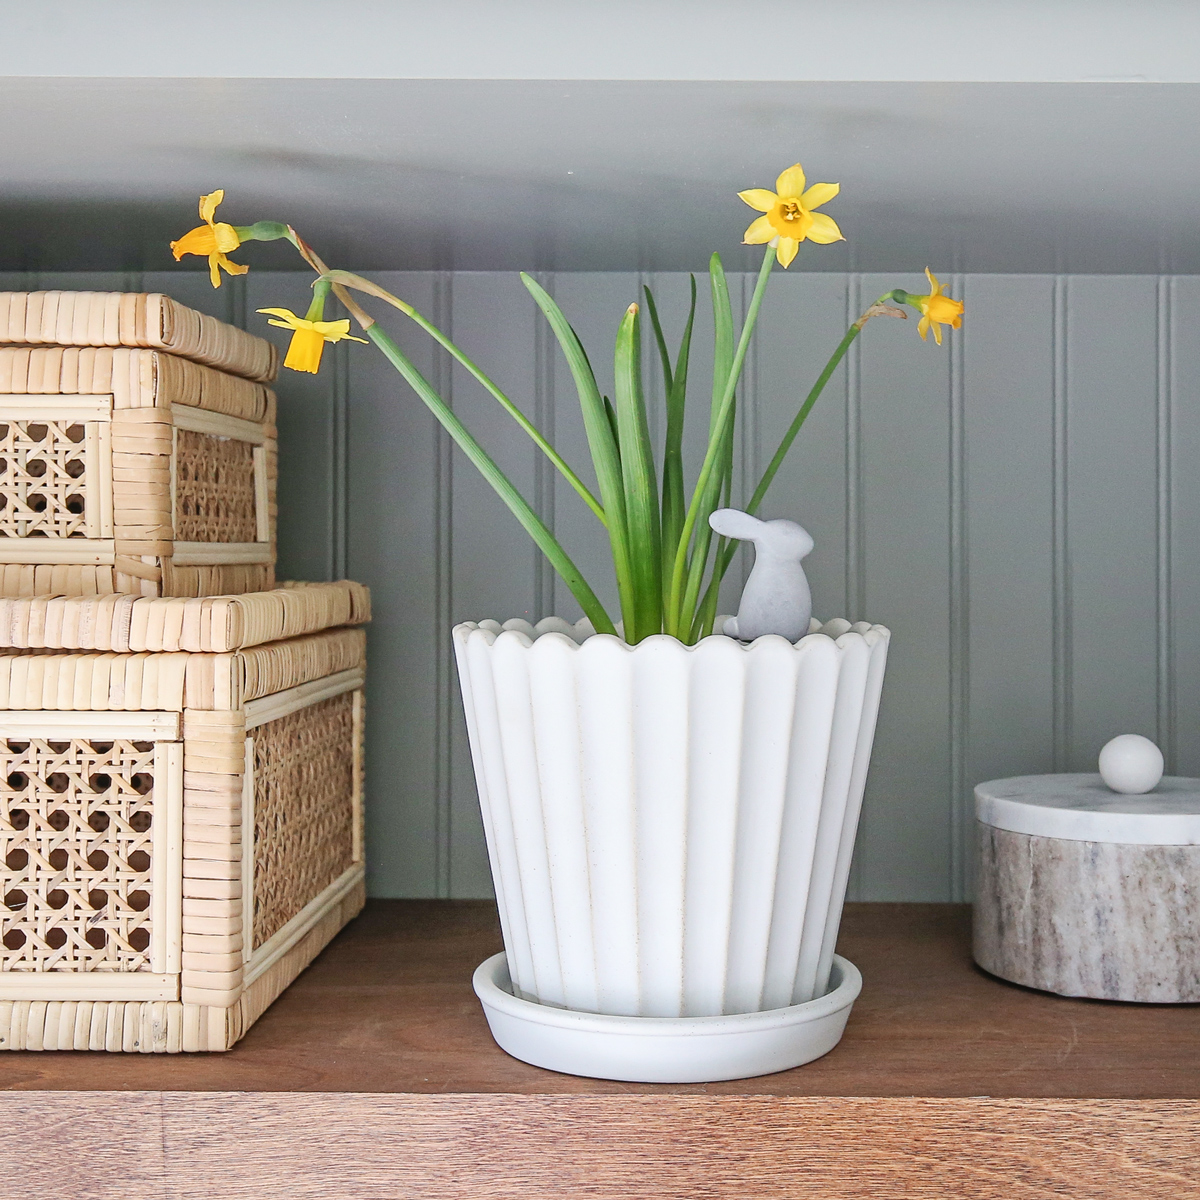 budget friendly spring decor ideas from target and amazon